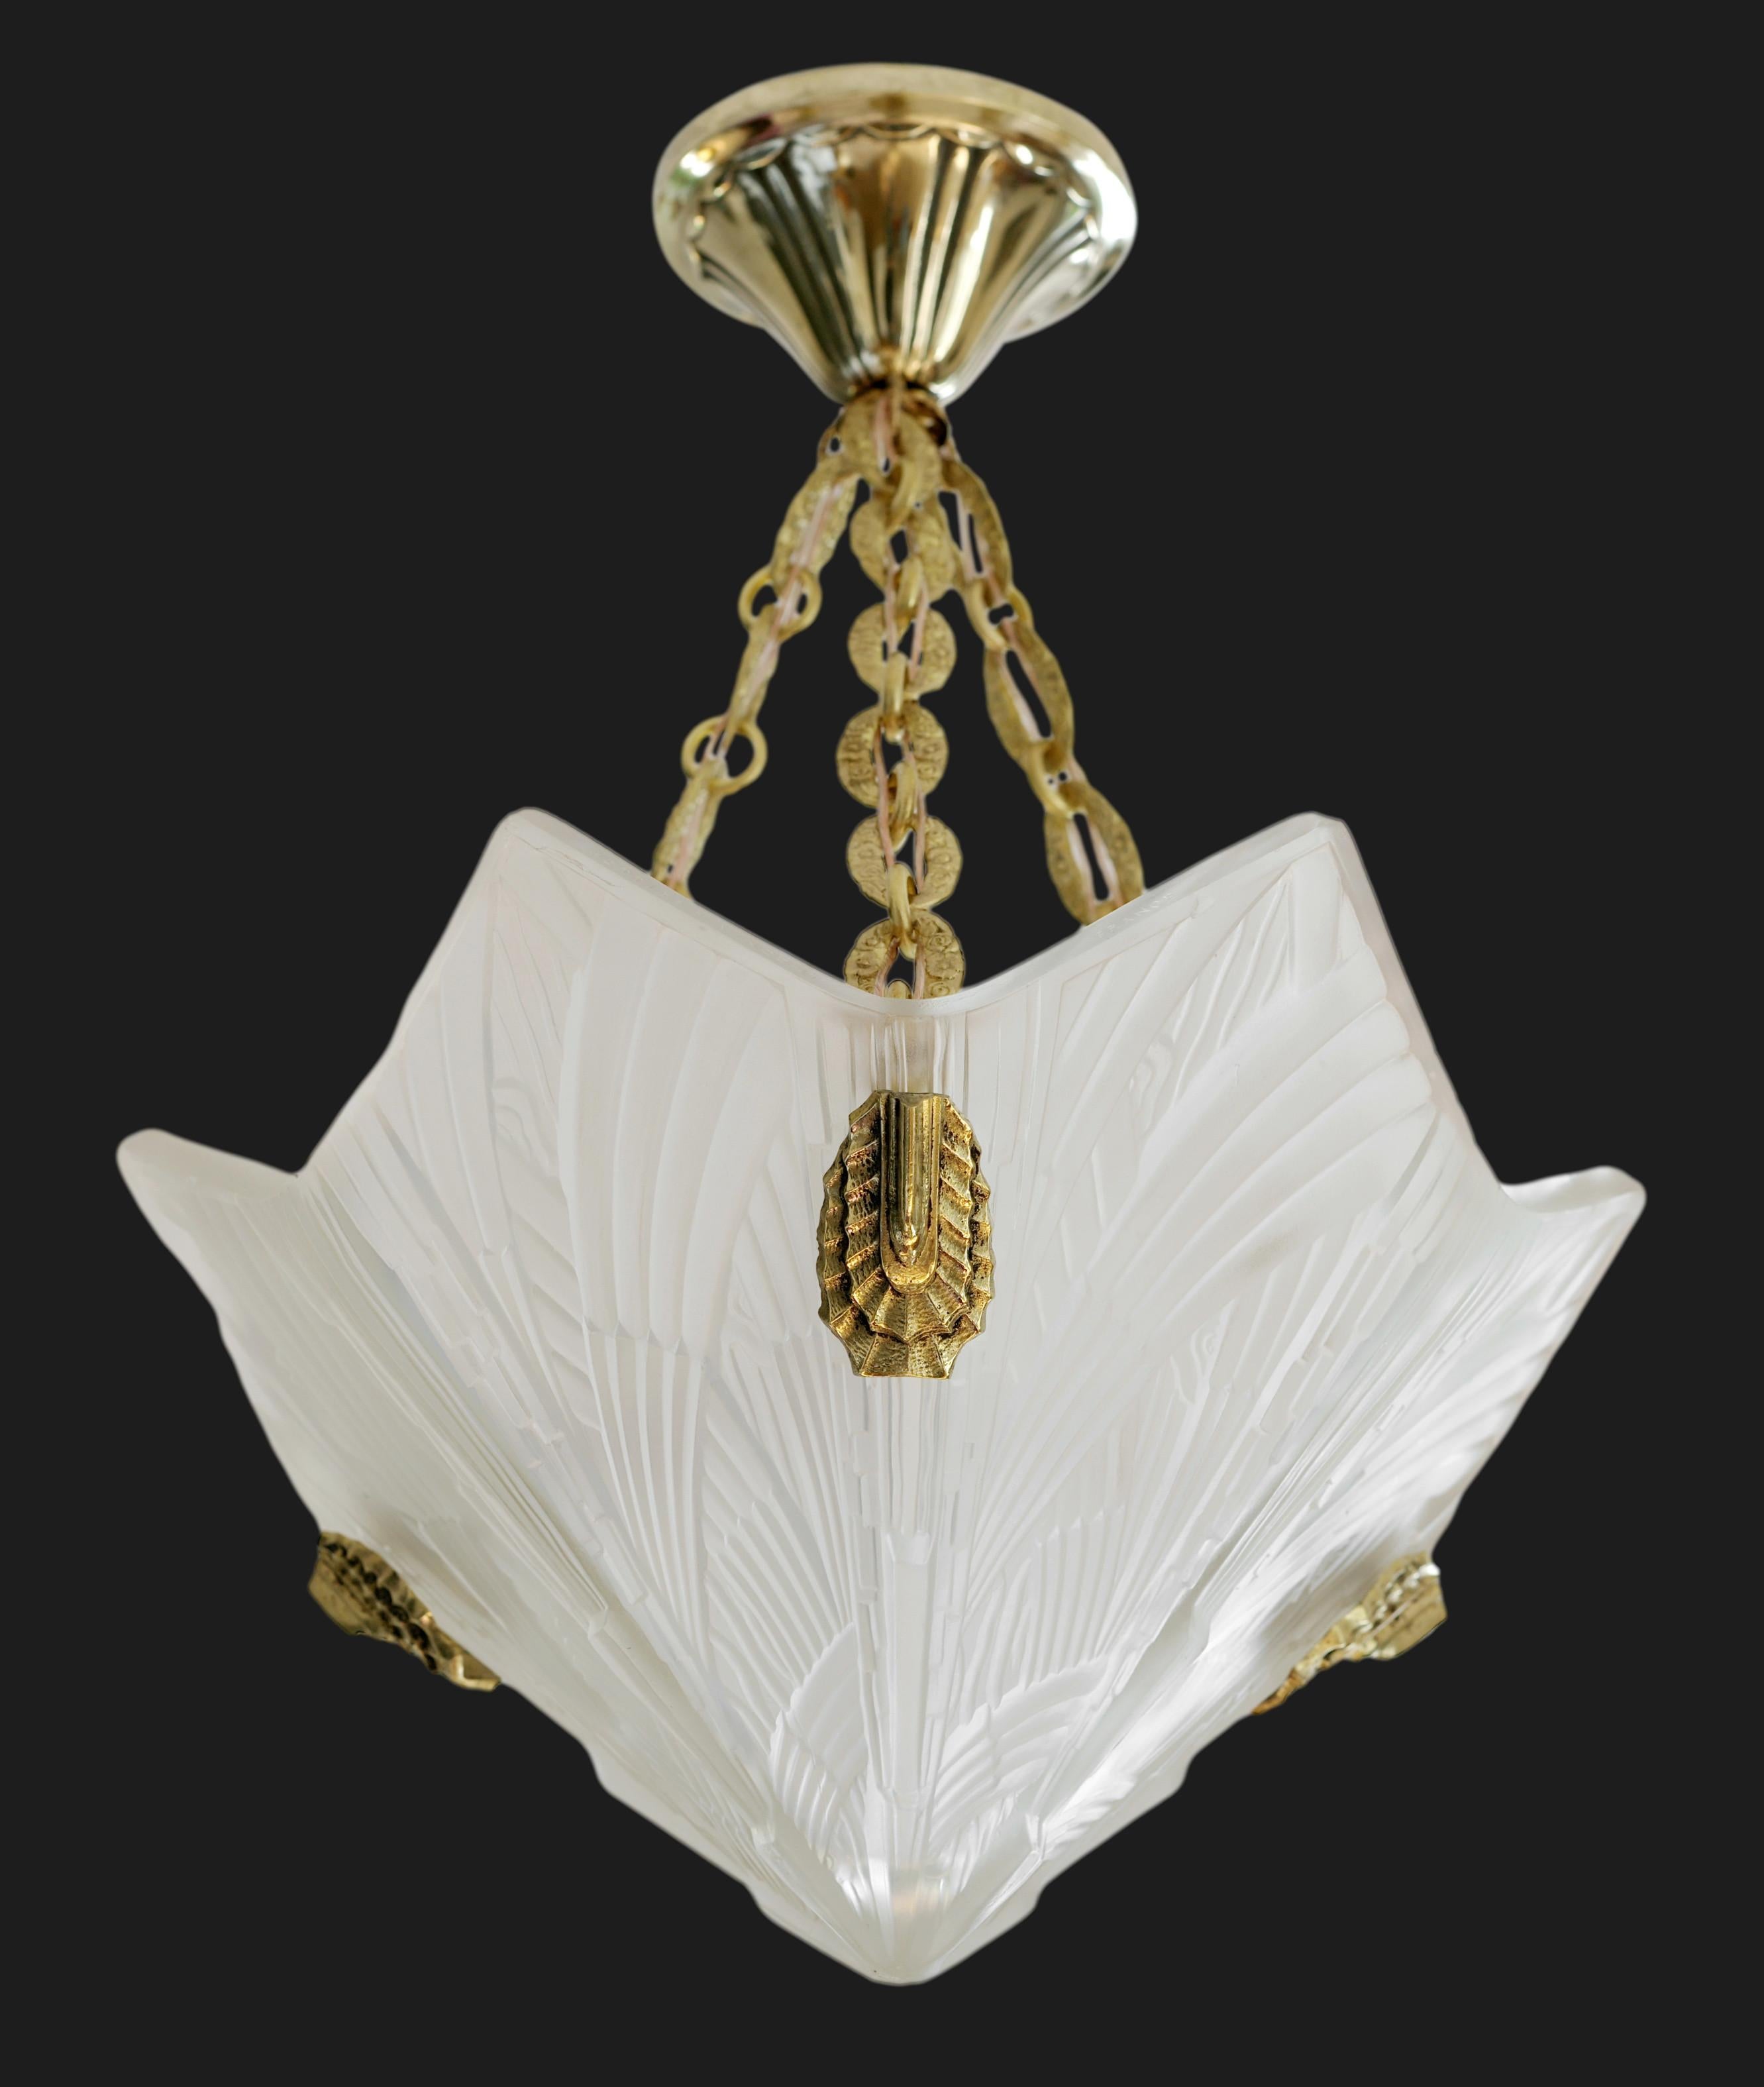 French Art Deco pendant chandelier by Hettier-Vincent, 10 rue de Turenne in Paris, France, circa 1925. Sharp and very well defined thick frosted molded glass and solid bronze fixture. Height : 17.7